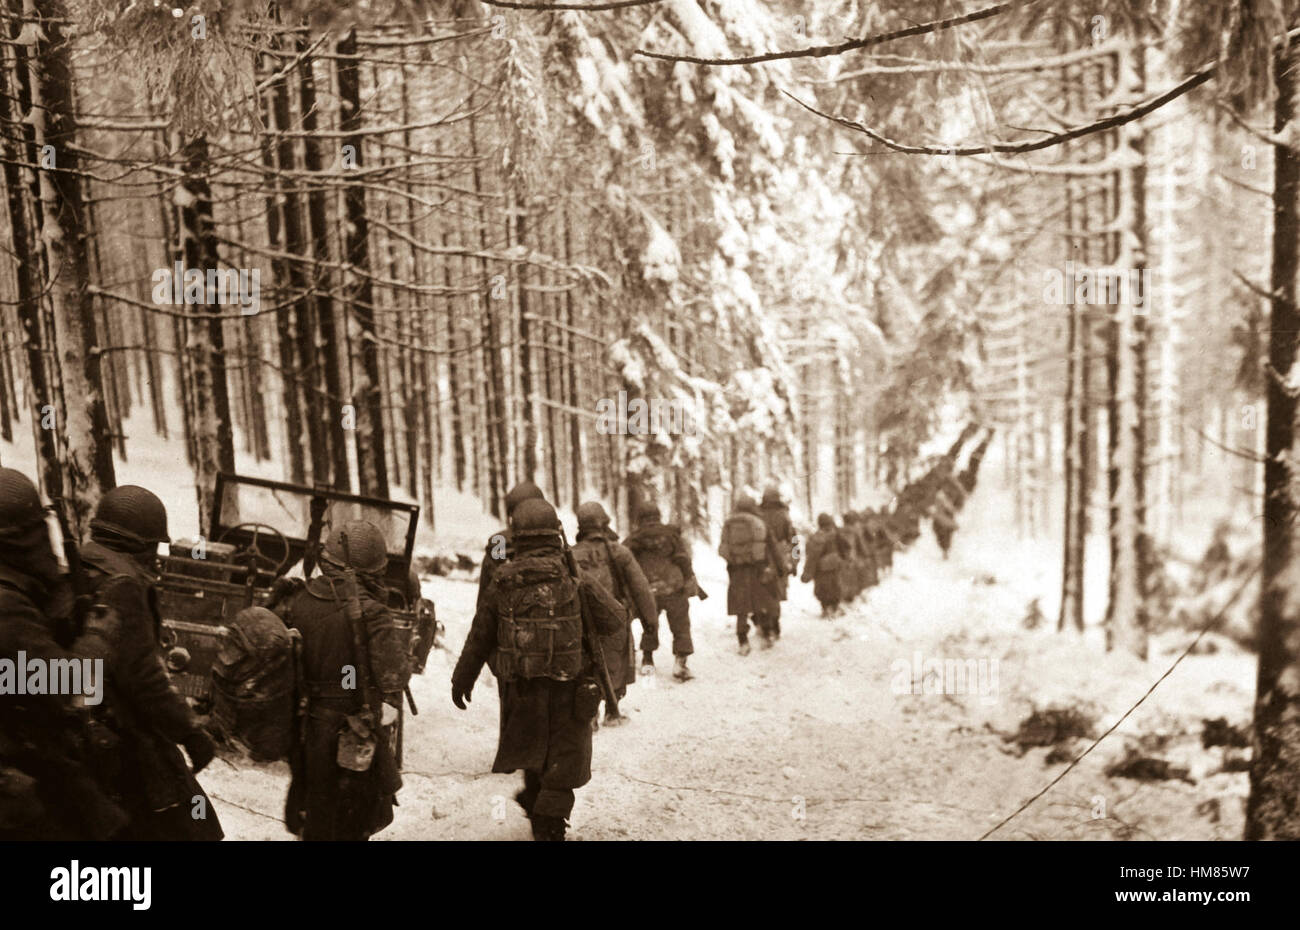 American soldiers of the 289th Infantry Regiment march along the snow-covered road on their way to cut off the St. Vith-Houffalize road in Belgium.  January 24, 1945.  Richard A. Massenge.  (Army) NARA FILE #:  111-SC-199406 WAR & CONFLICT BOOK #:  1079 Stock Photo